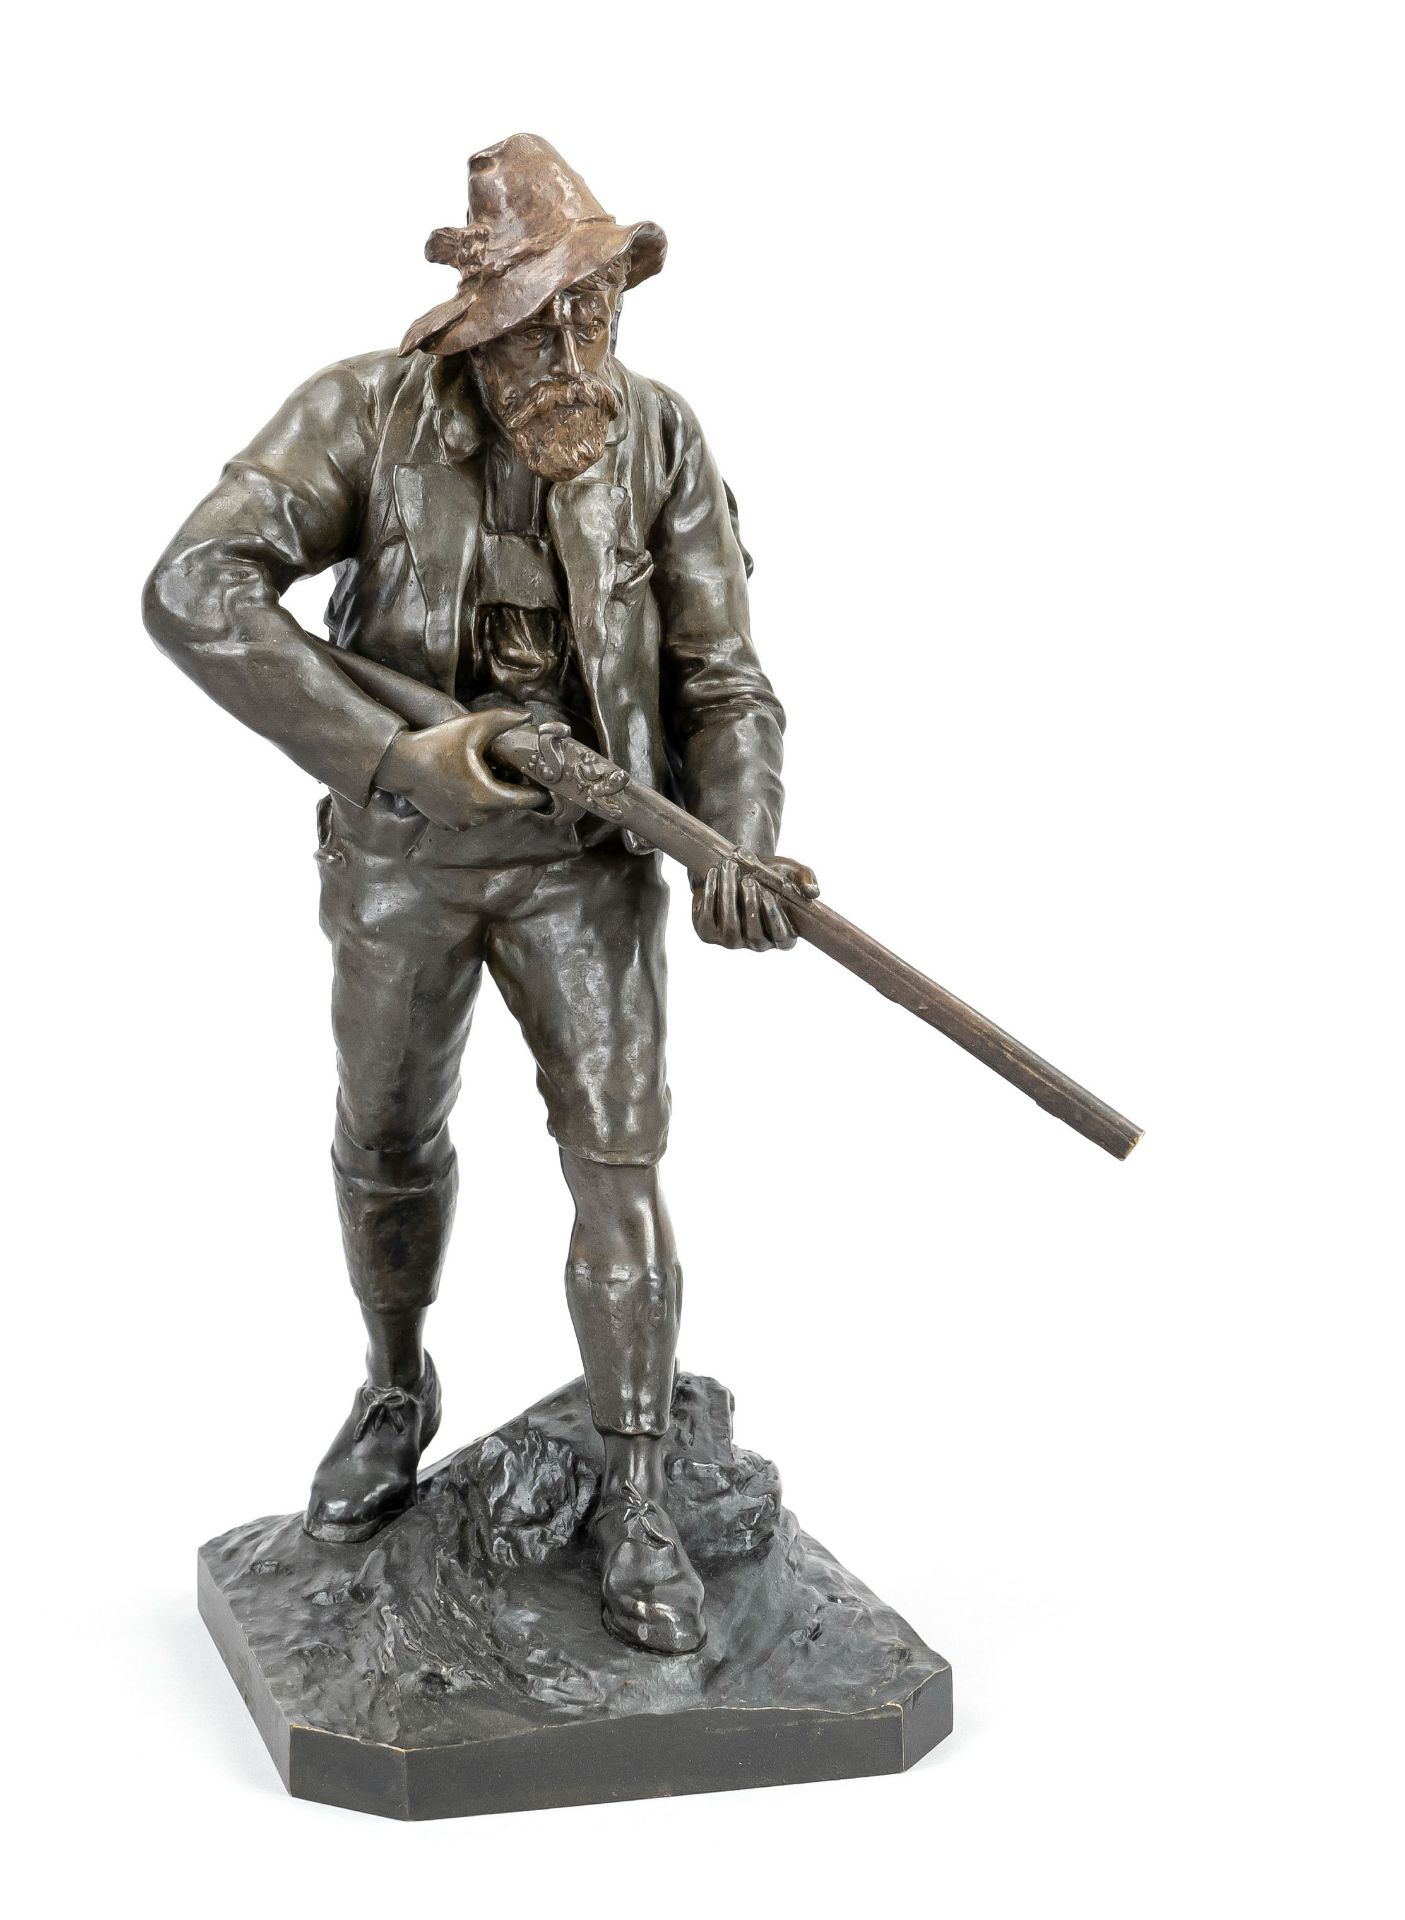 Johan Eduard Dannhauser (1869-?), standing figure of a hunter, two-tone patinated bronze, signed and